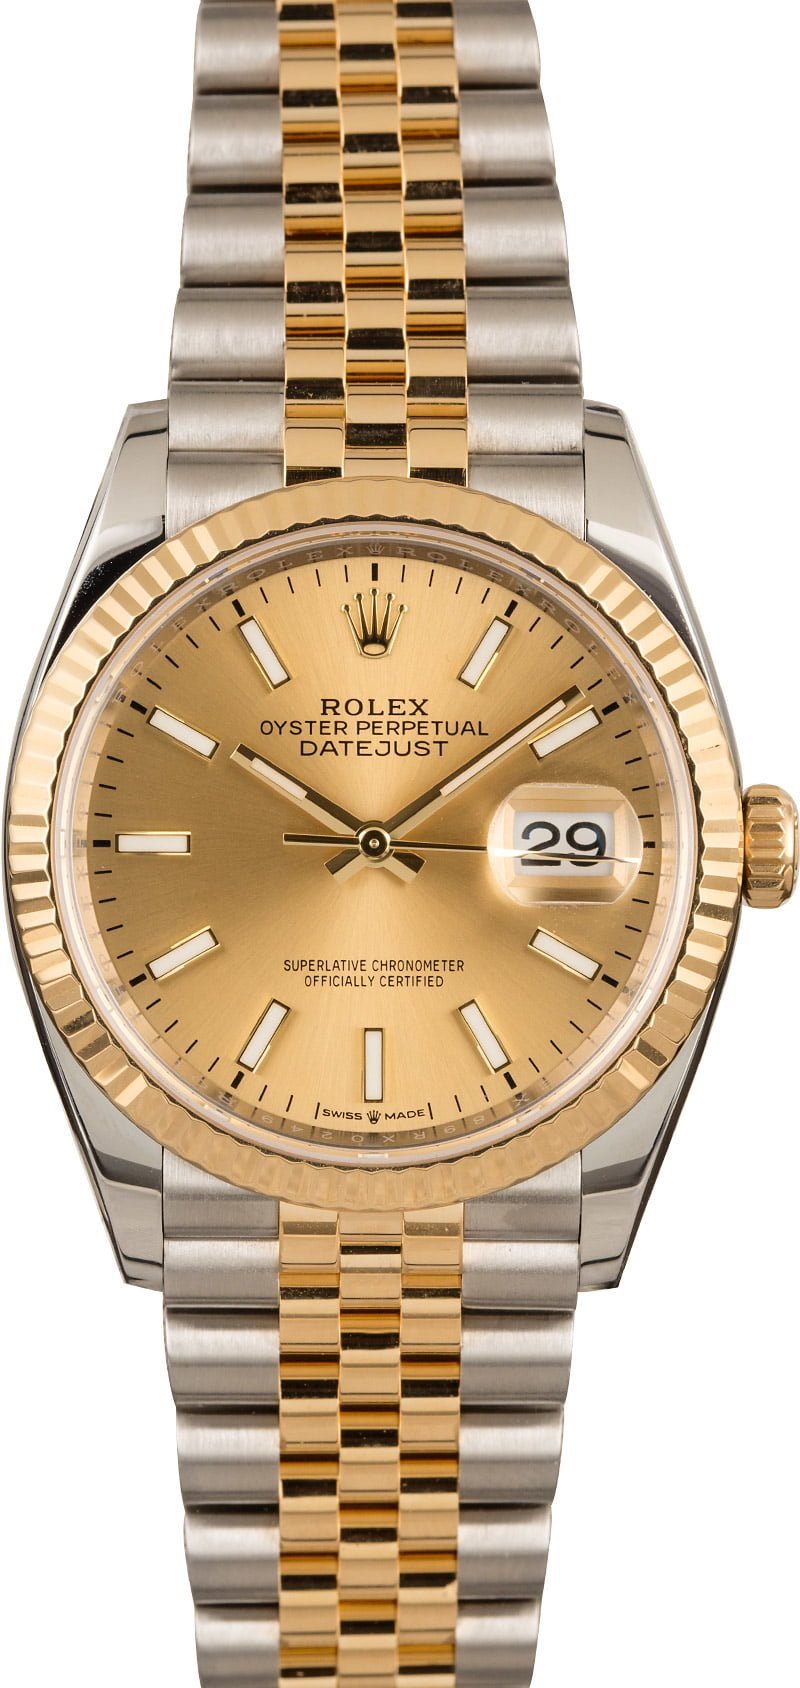 Rolex Datejust 36 Ultimate Luxury Watch Review Rolesor Two-Tone 126233